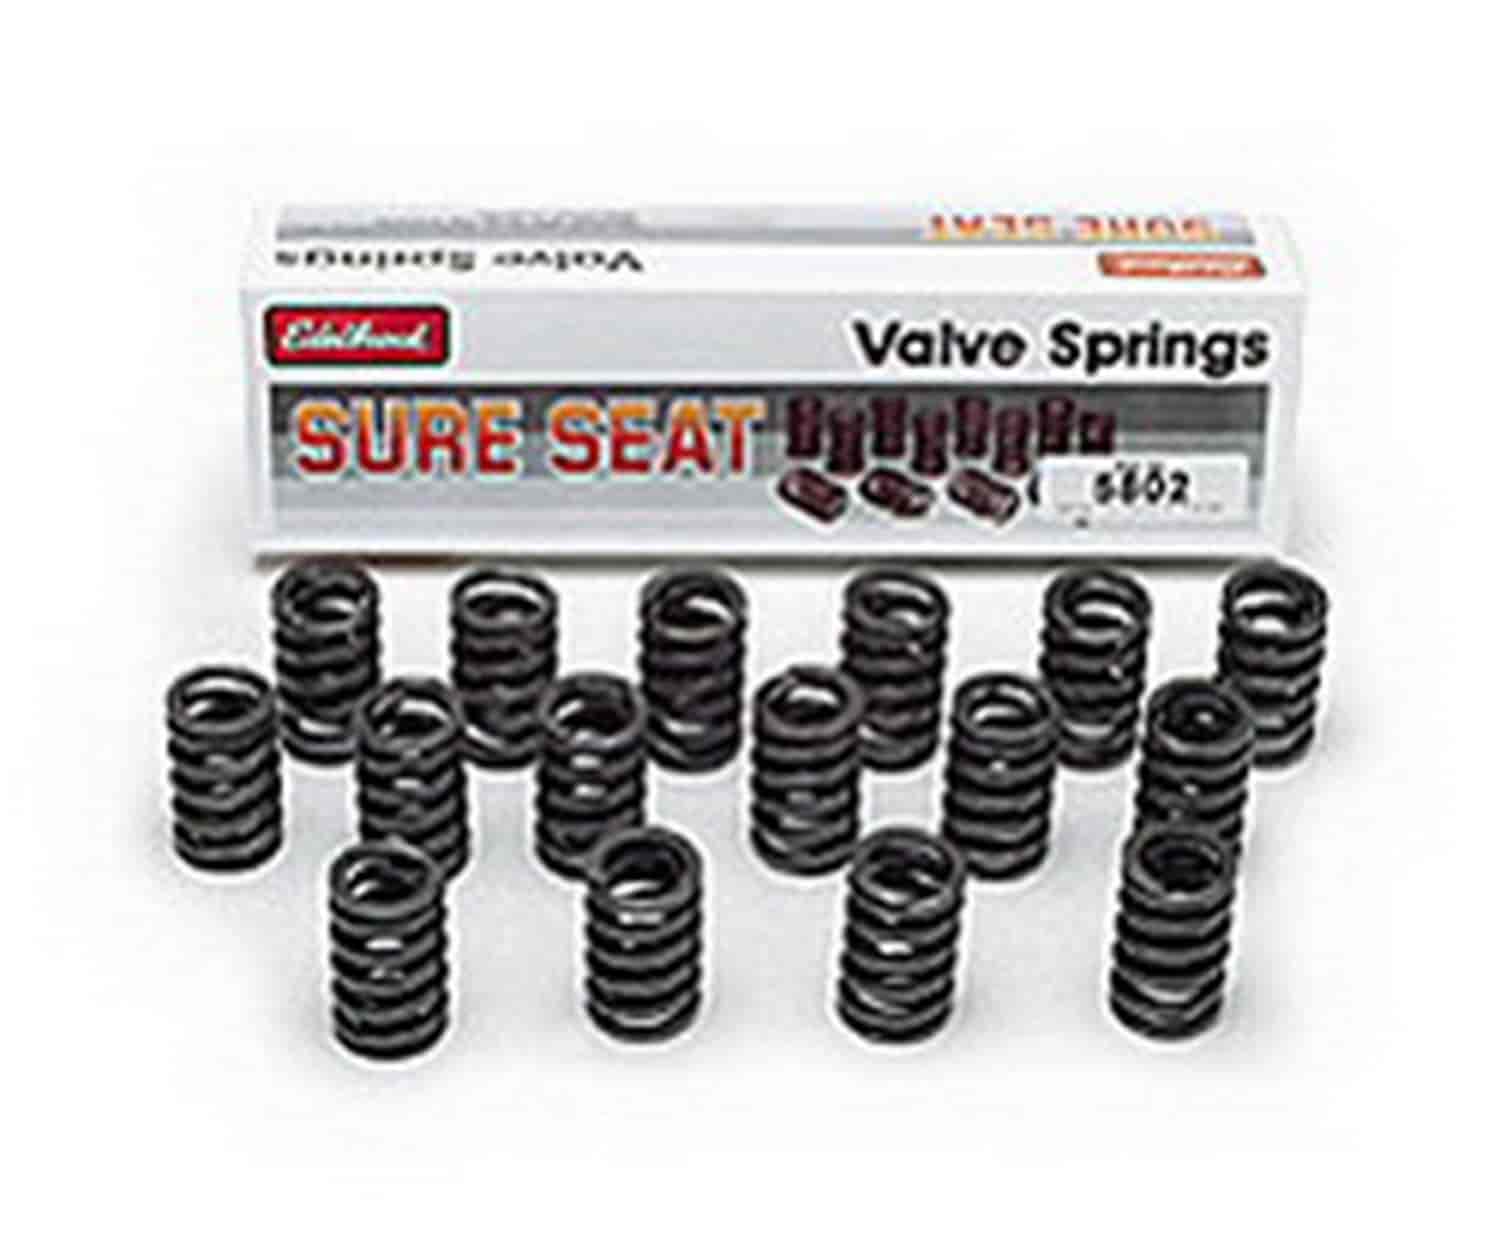 Sure Seat Valve Springs for 1969-1987 Big Block Ford 429/460 OE Cast Iron Head